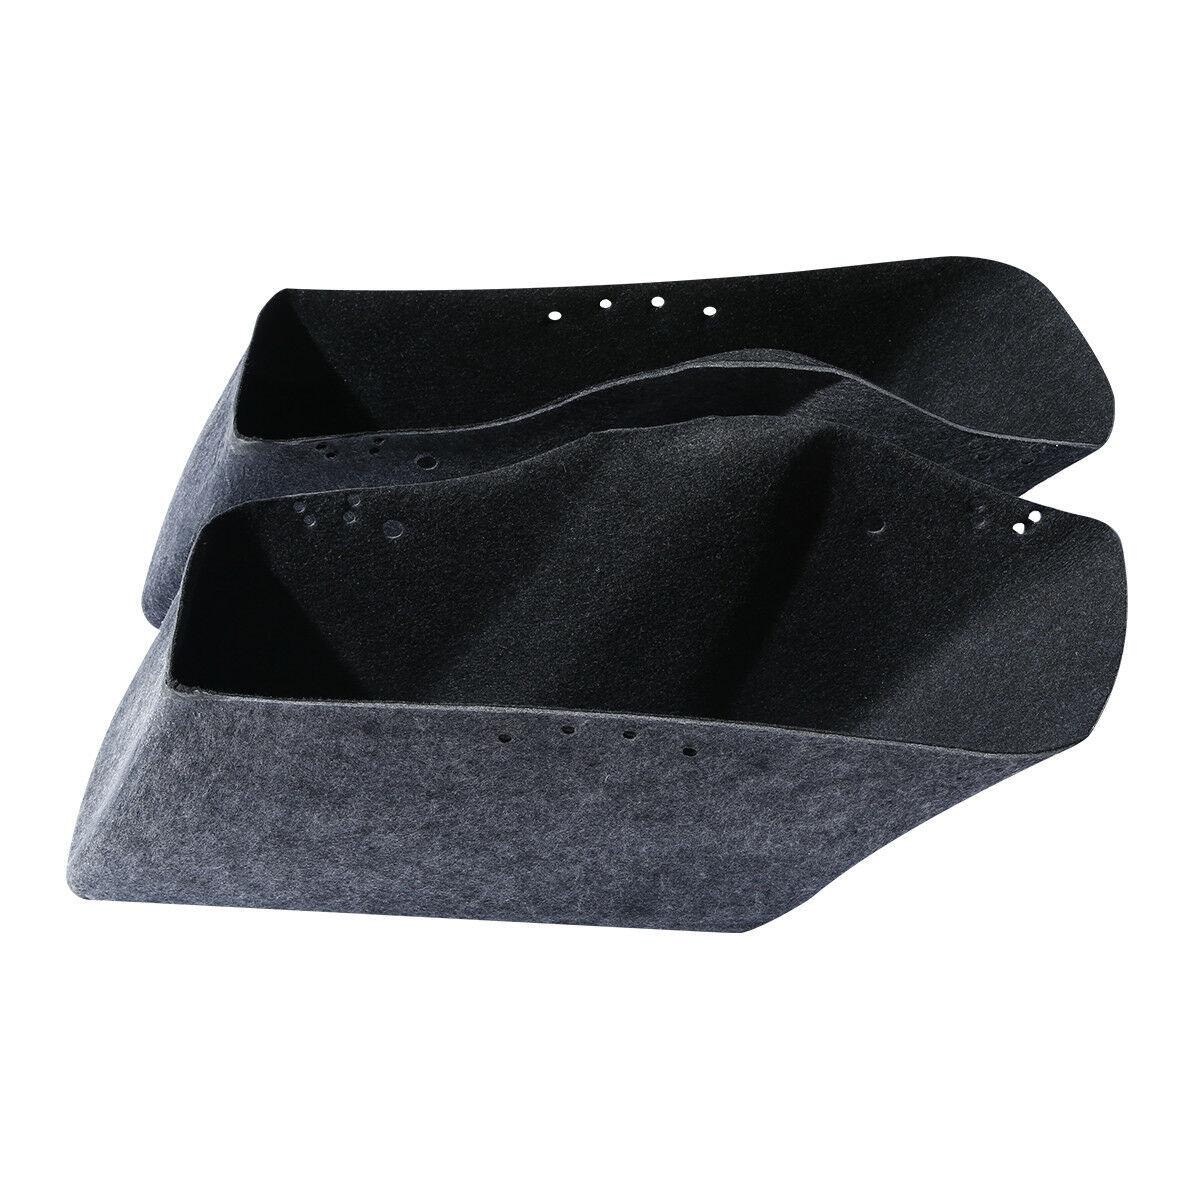 Drop-in Saddlebag Insert Carpet Liner Fit For Harley Touring Road King 2014-2022 - Moto Life Products